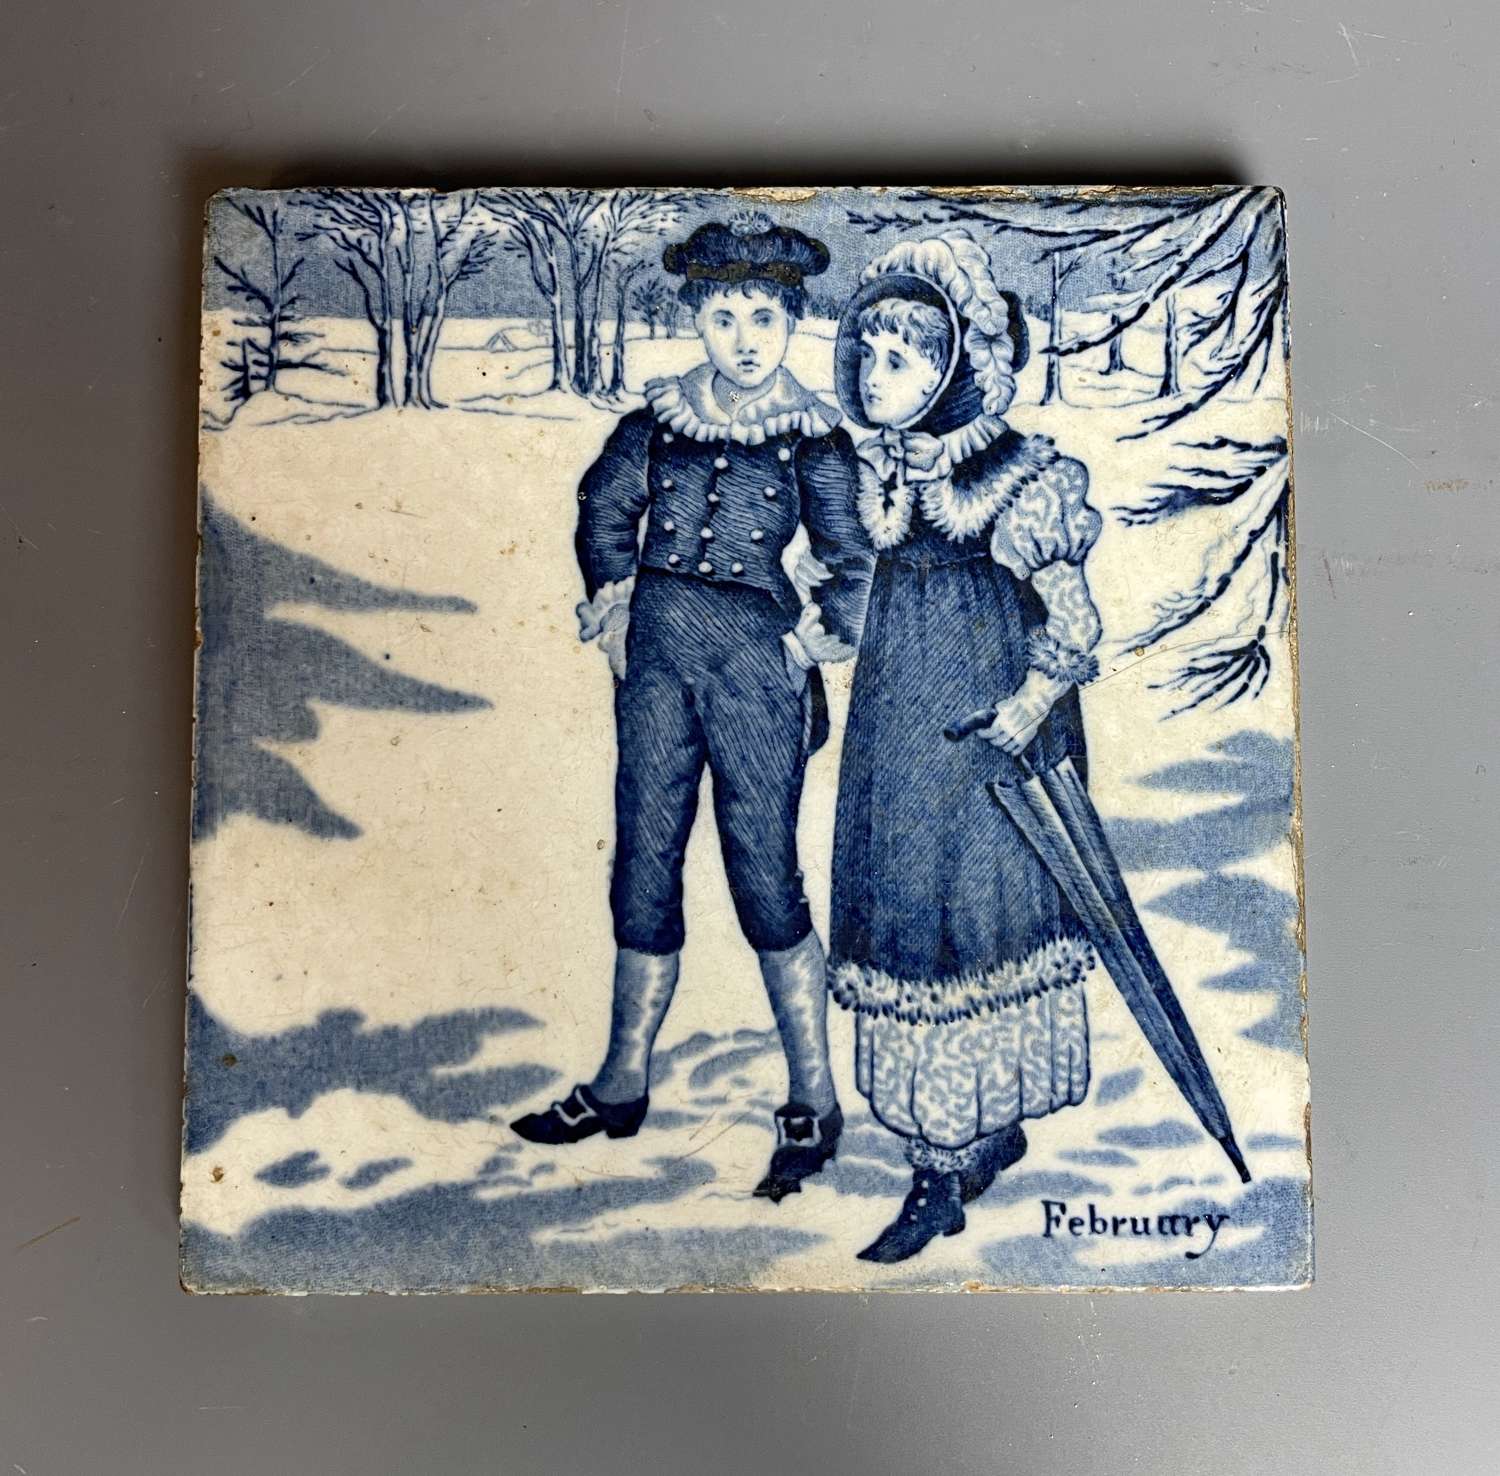 Wedgwood Tile Depicting February from The Months of the Year Series